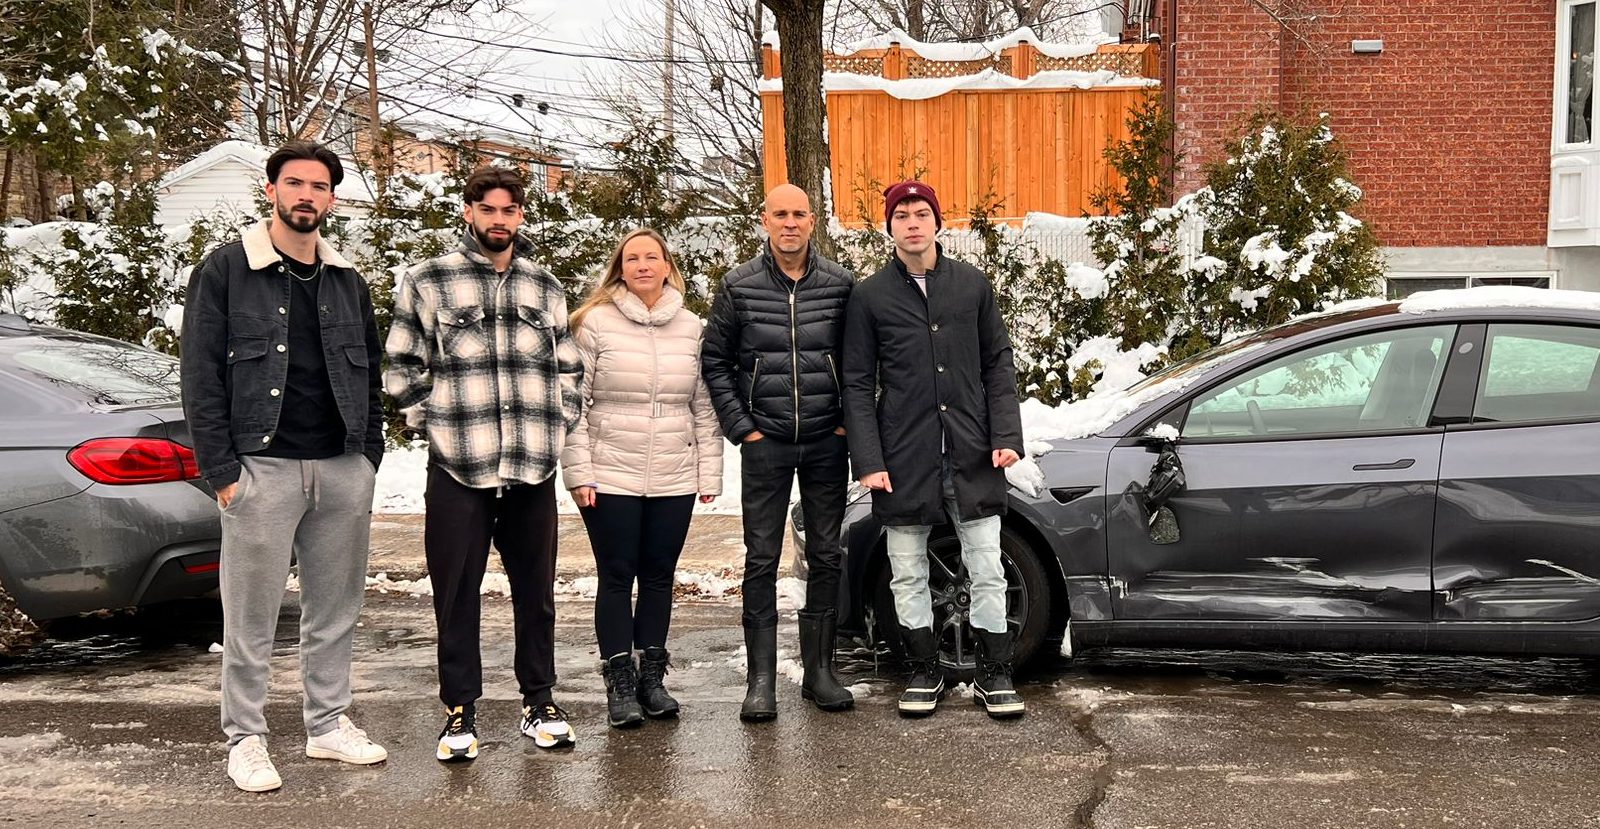 Family gets apology after snowplow crashes into cars, contractor faces penalty